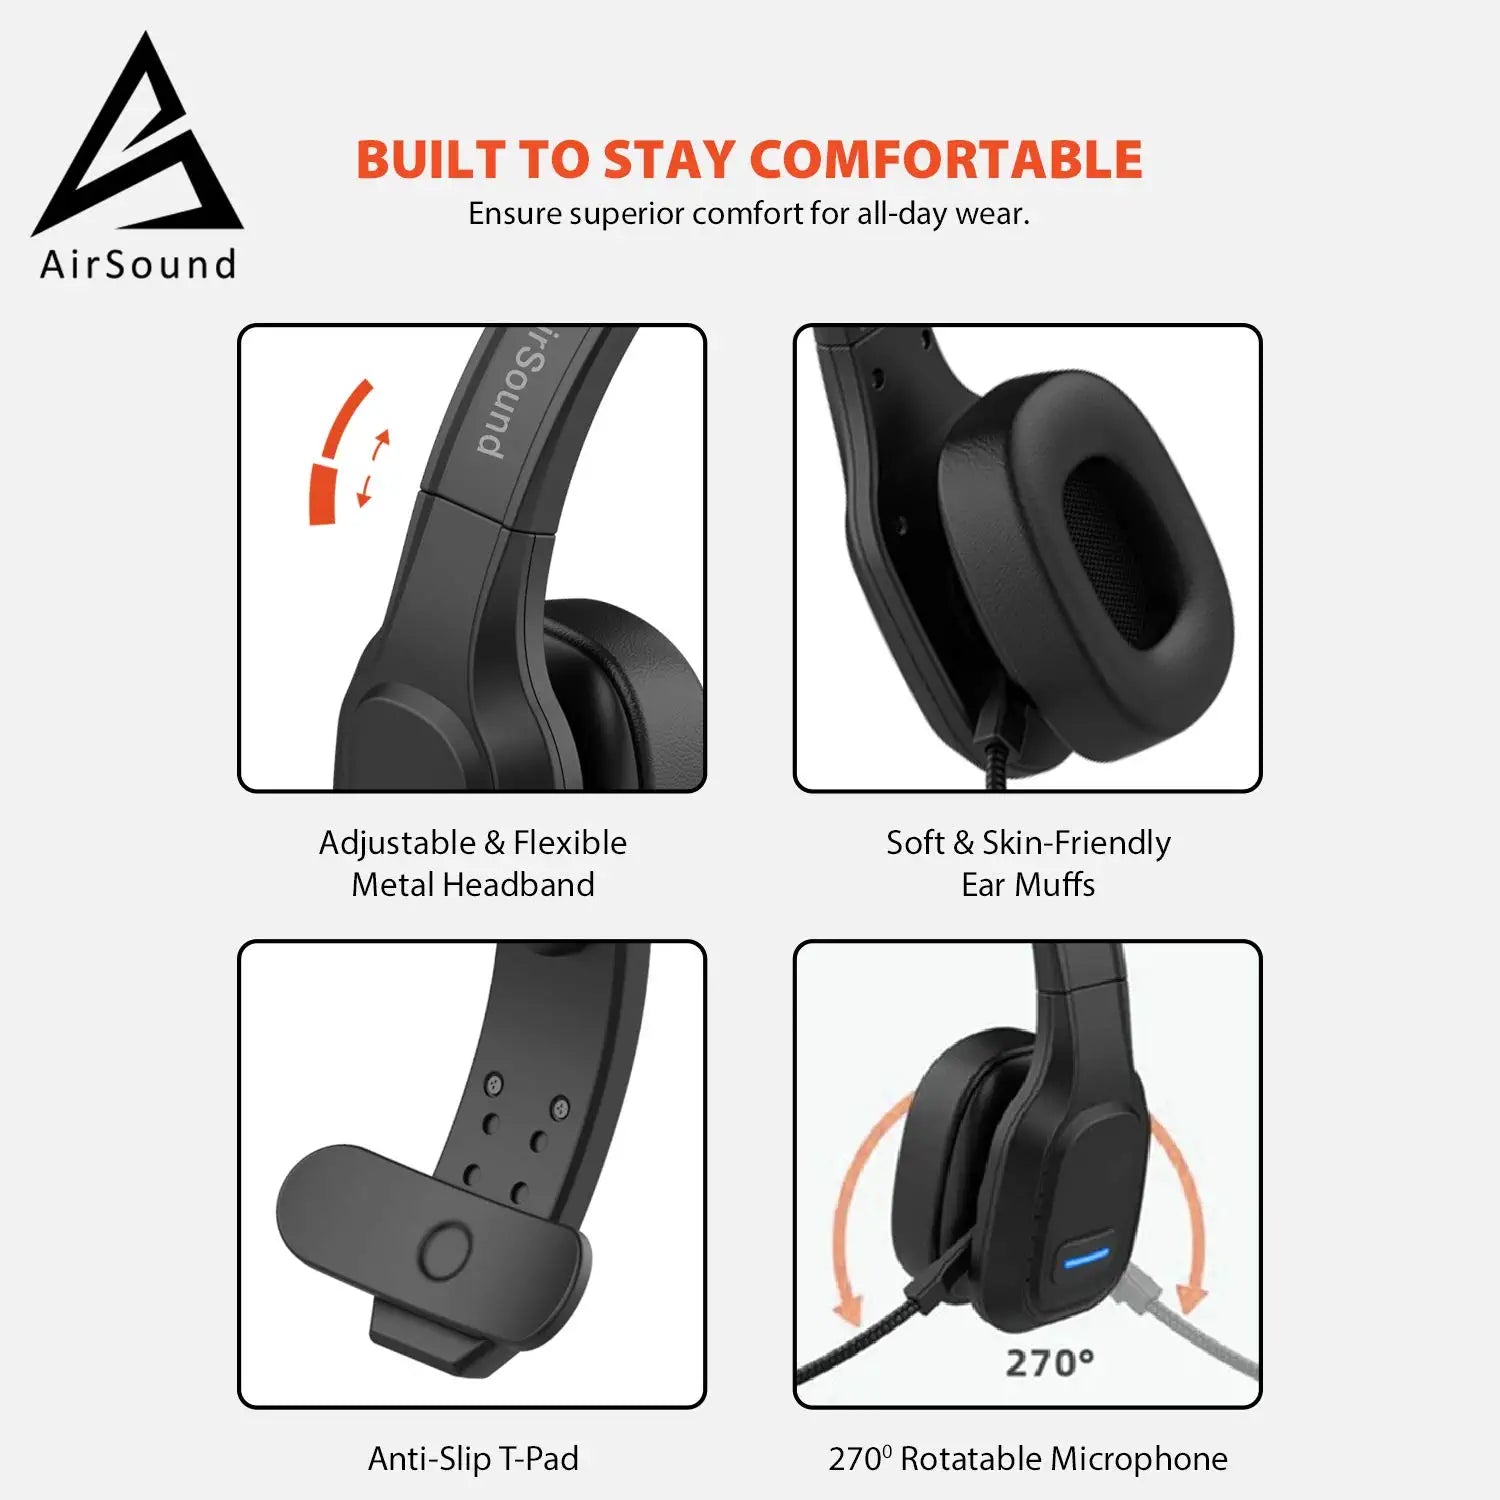 AirSound M100 Pro Bluetooth Wireless Headset | Flexible Microphone, for Conference Calls, 32 Hr Talk Time, CVC 8.0 Noise-Cancelling On-Ear